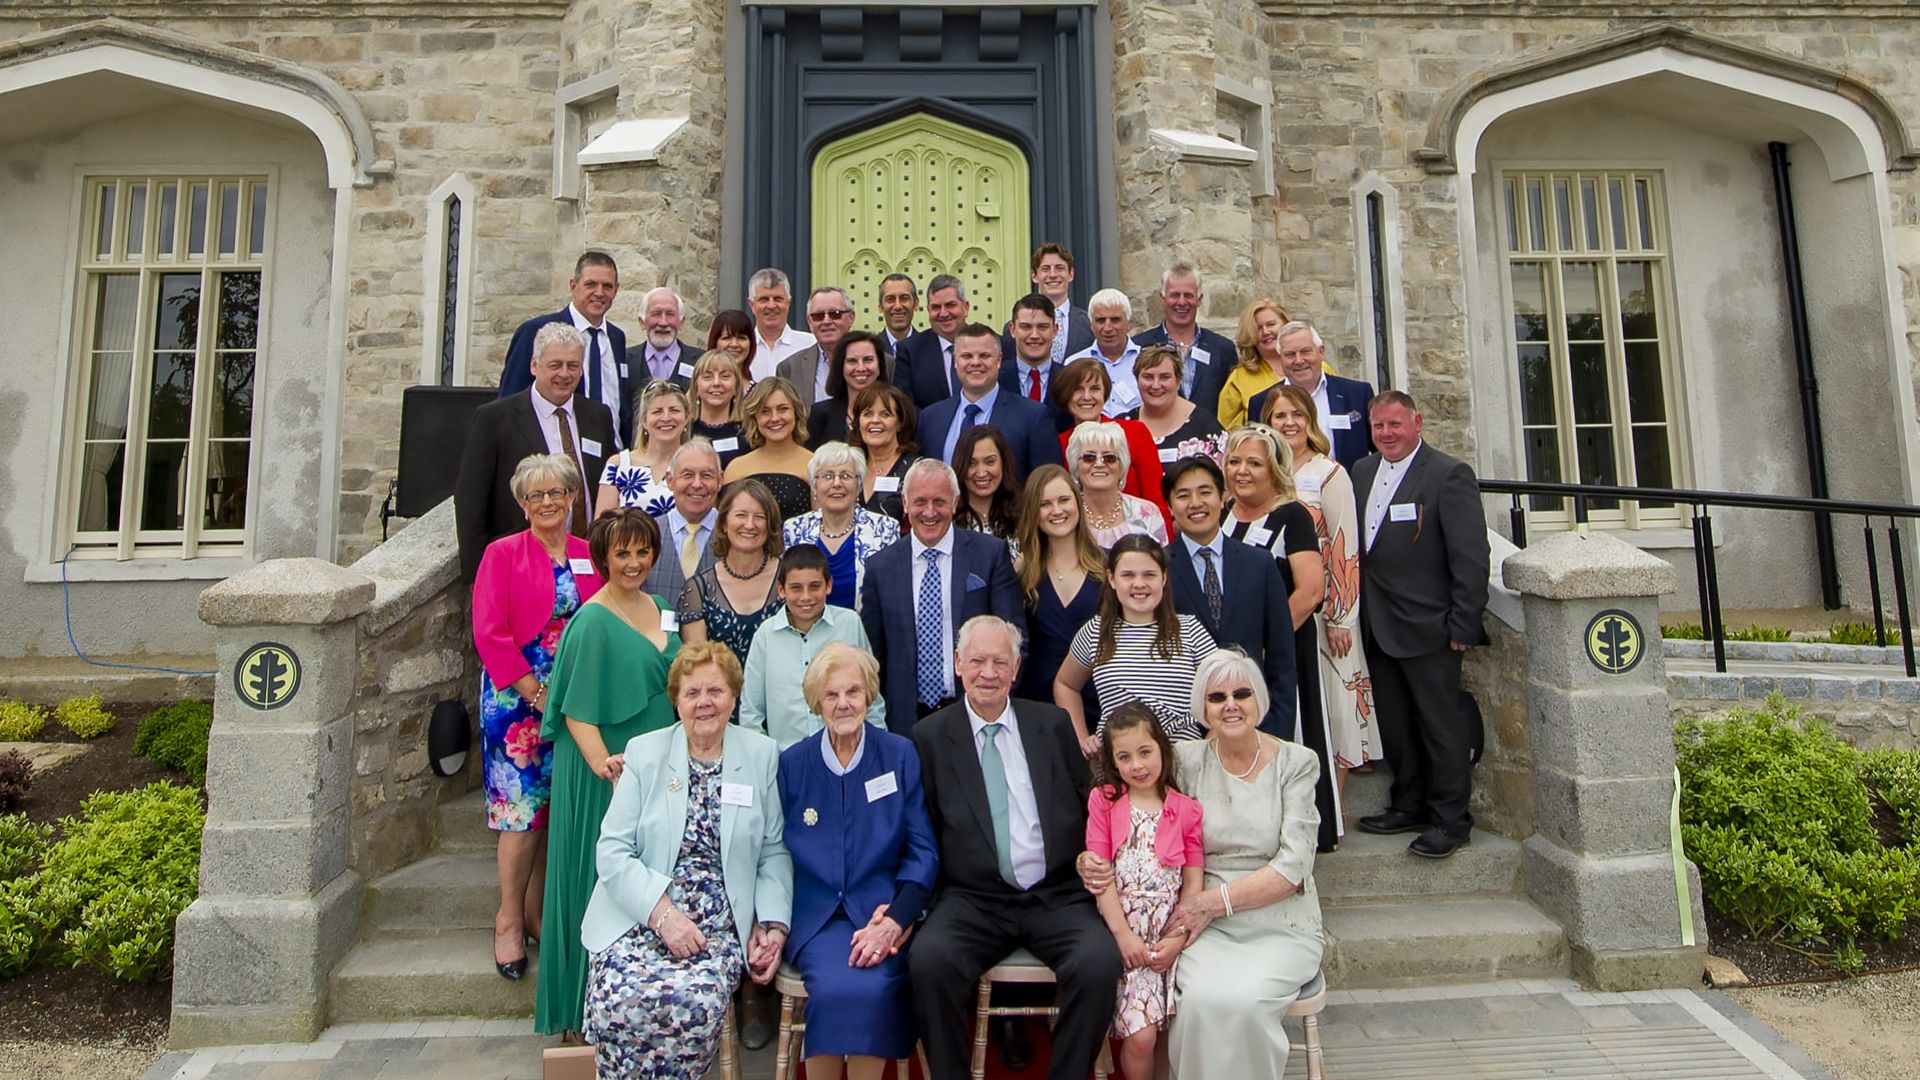 Historic Hotel officially opens in County Armagh, Ireland